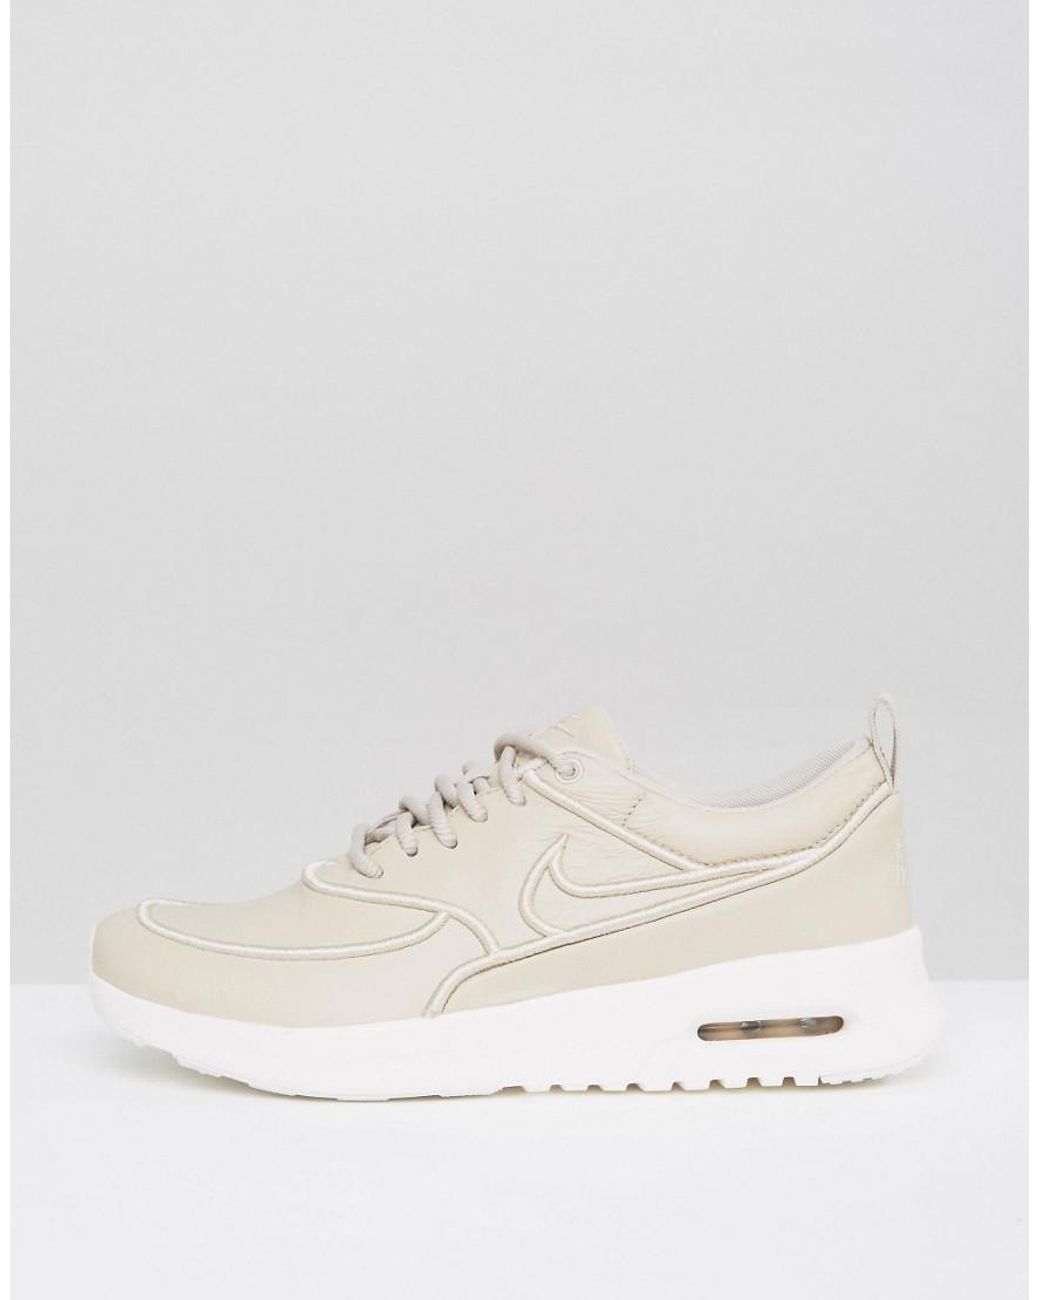 Nike Leather Air Max Thea Ultra Premium Trainers In Beige in Natural | Lyst  UK